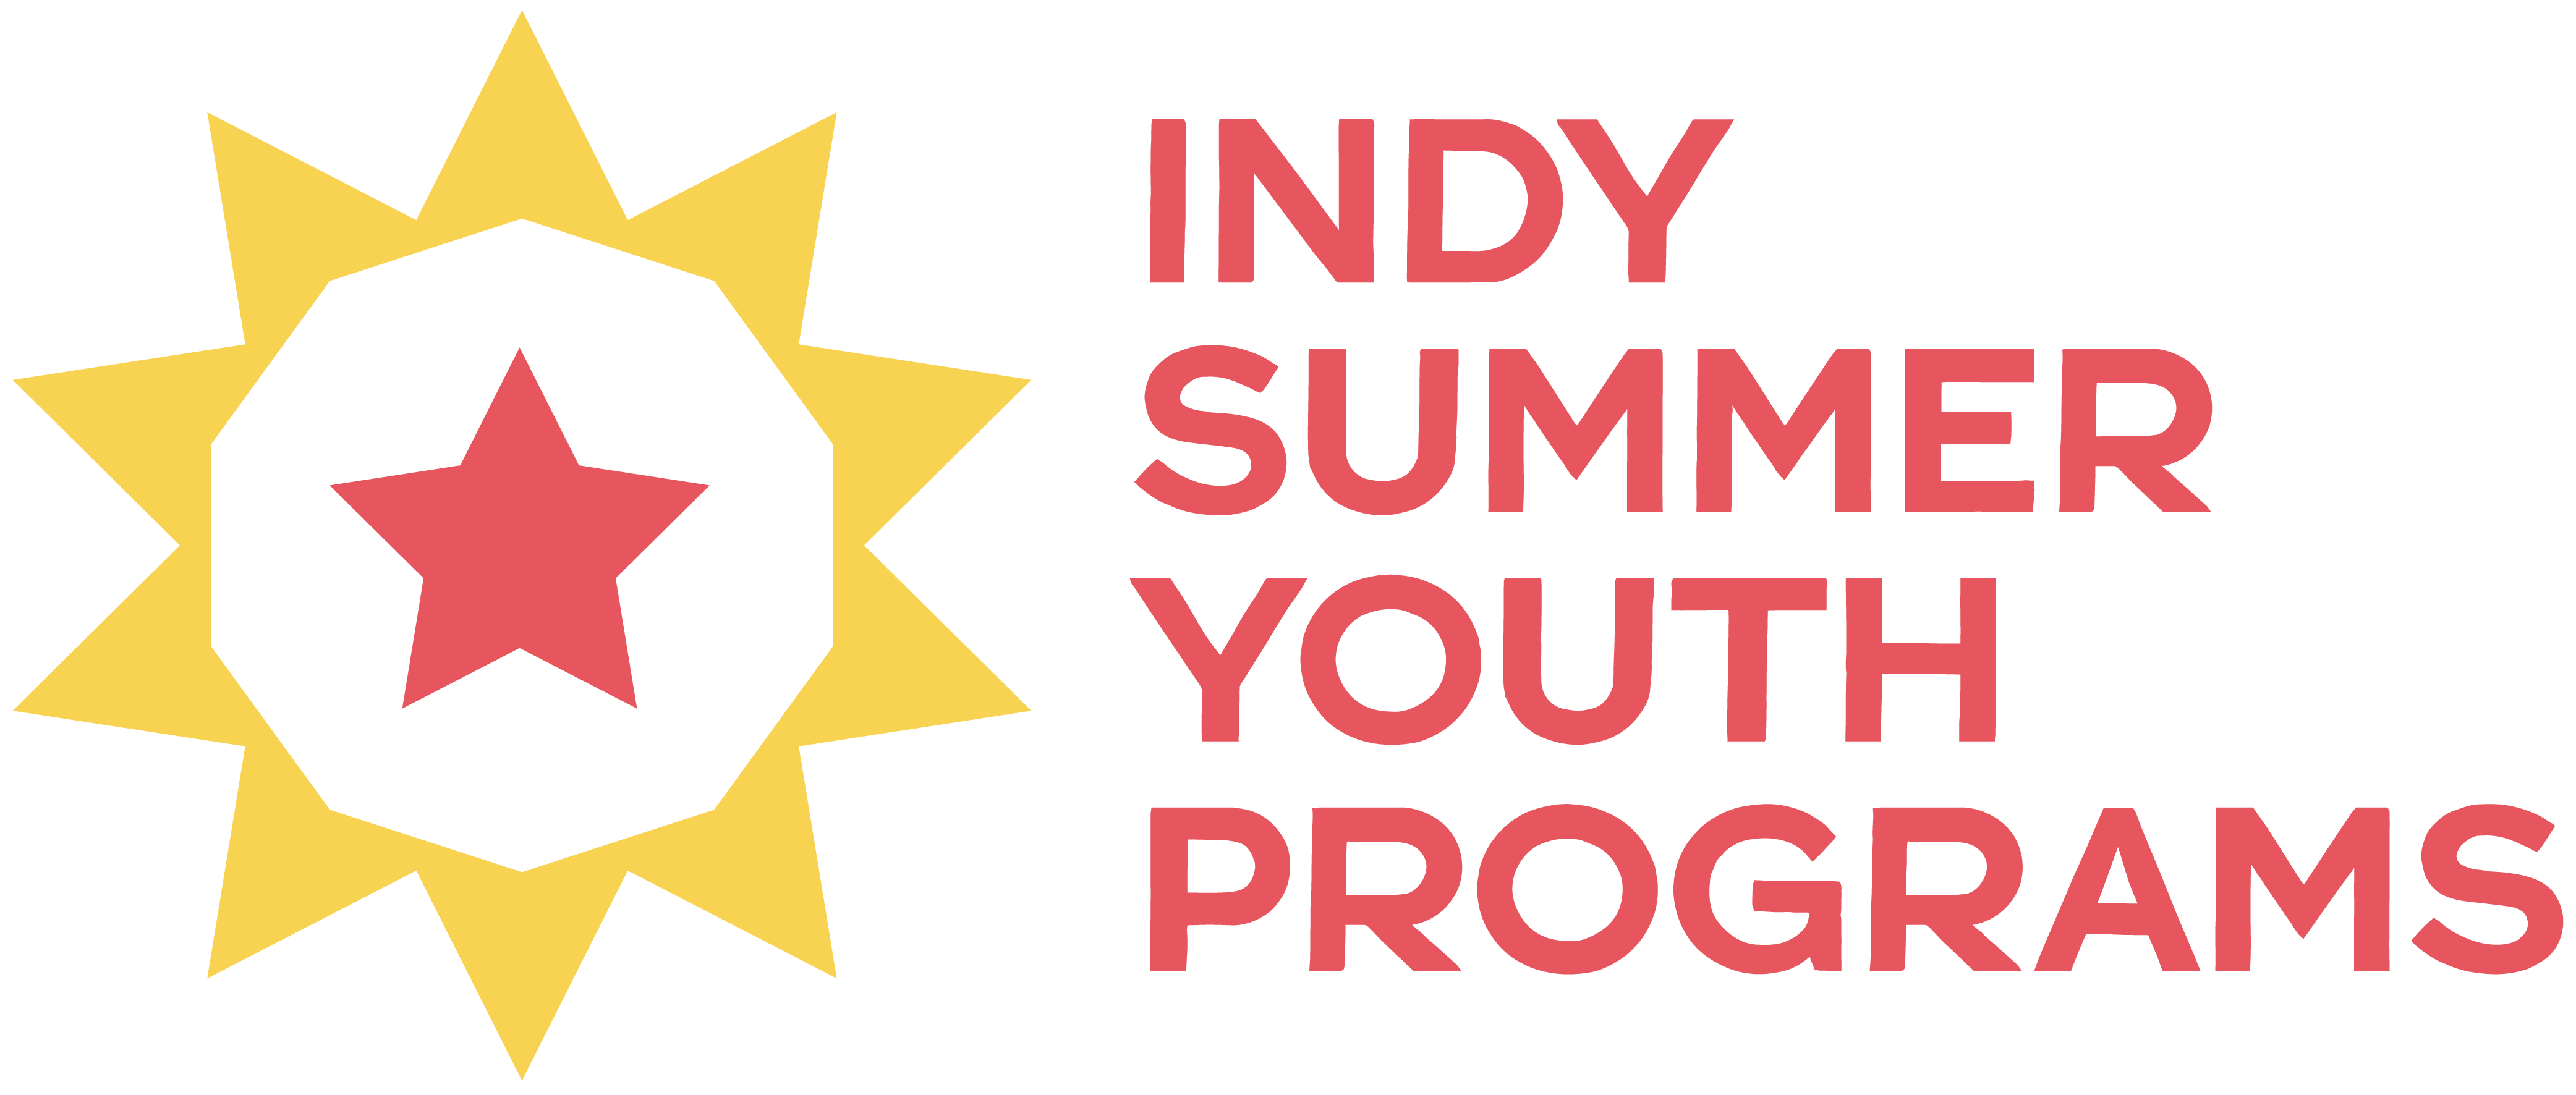 Indy Summer Youth Programs Logo